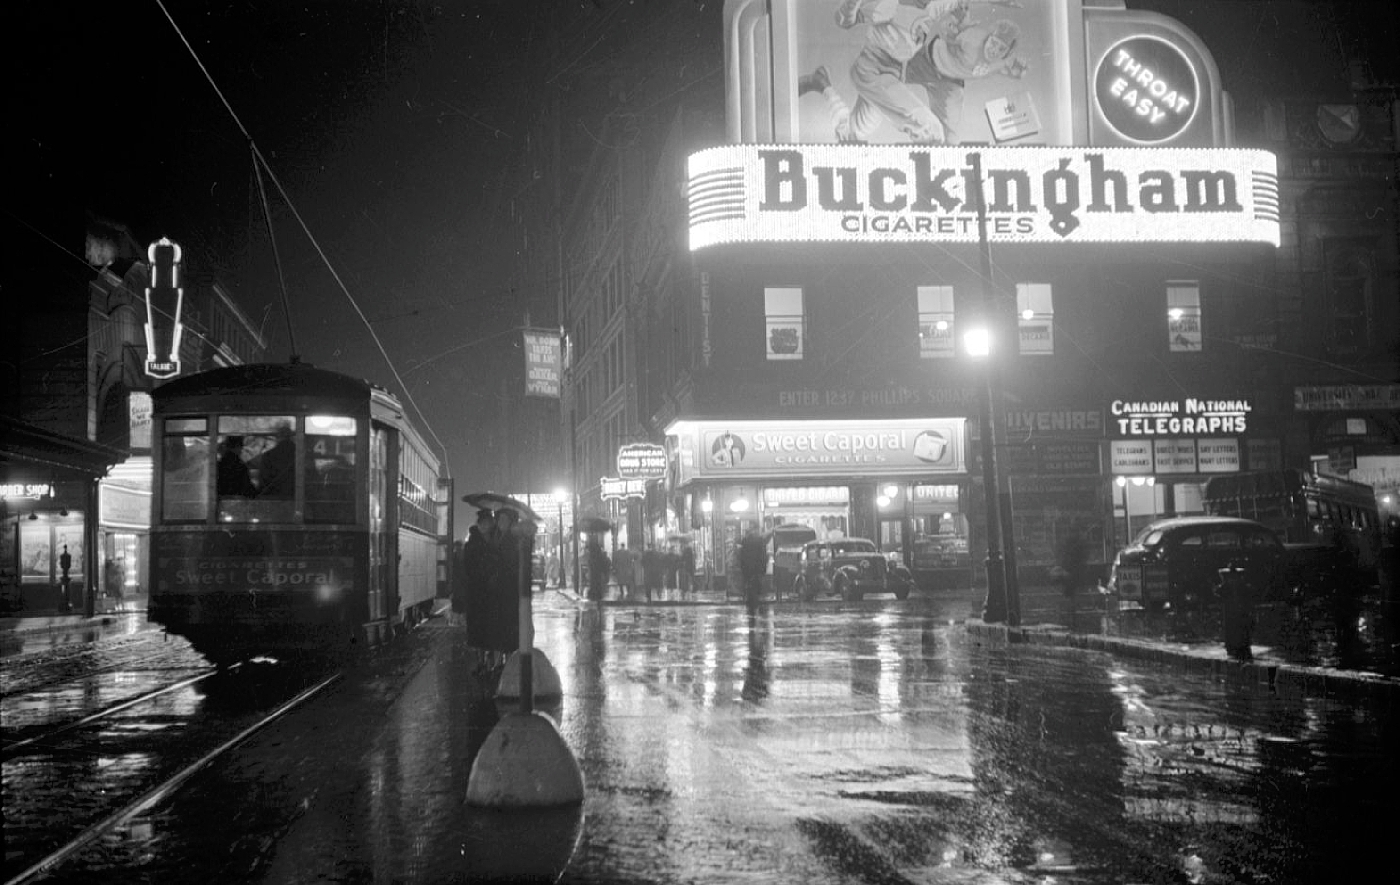 Nightscape. A streetcar passes a building with a neon sign advertising Buckingham cigarettes.